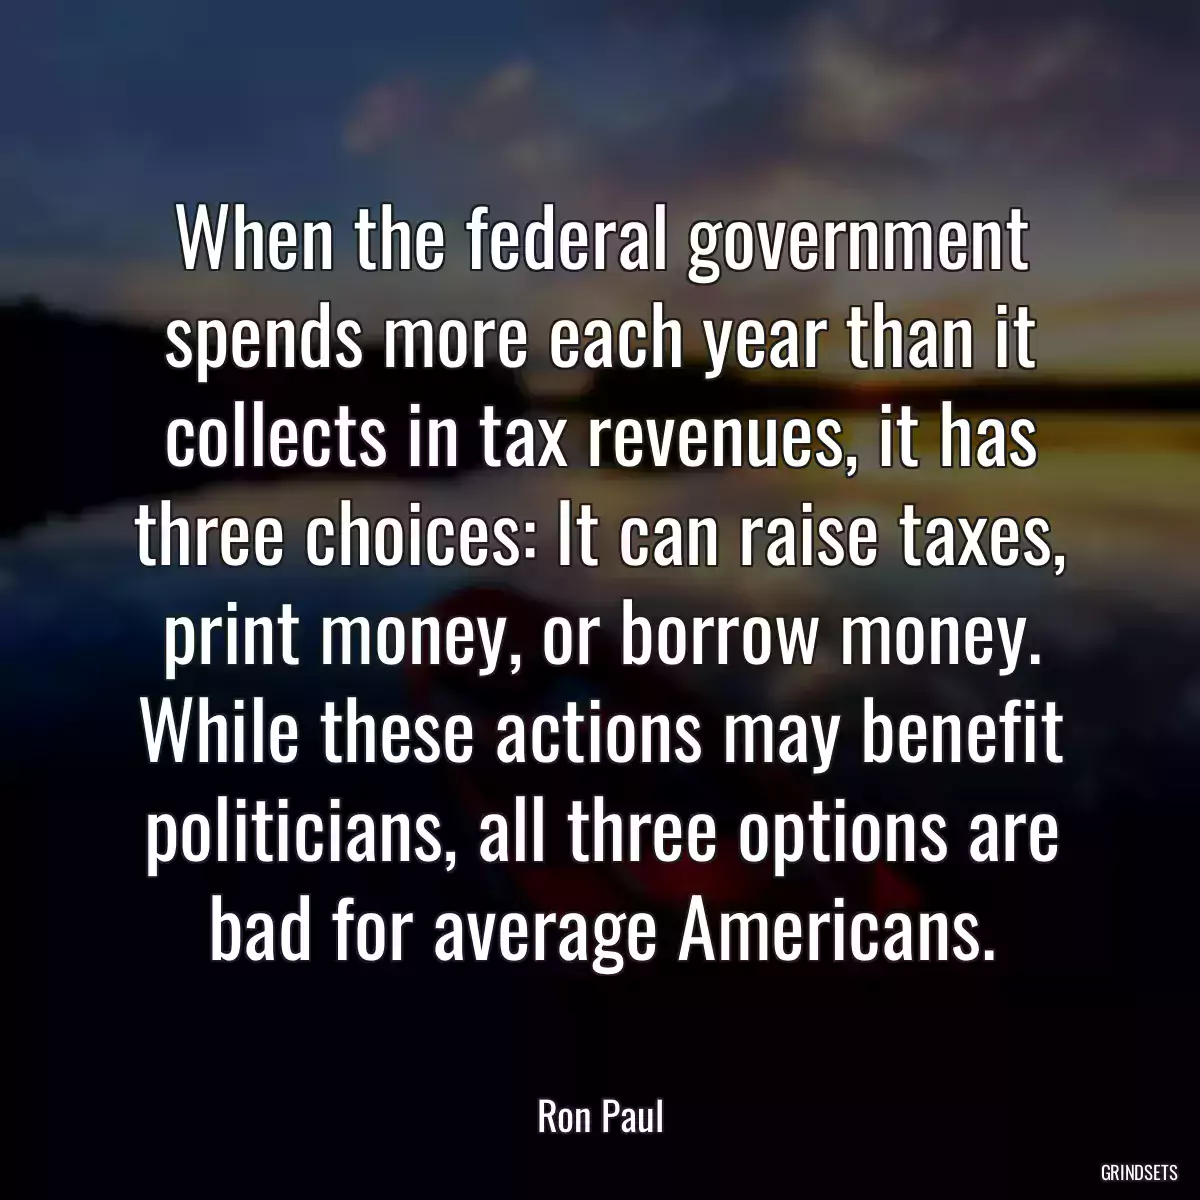 When the federal government spends more each year than it collects in tax revenues, it has three choices: It can raise taxes, print money, or borrow money. While these actions may benefit politicians, all three options are bad for average Americans.